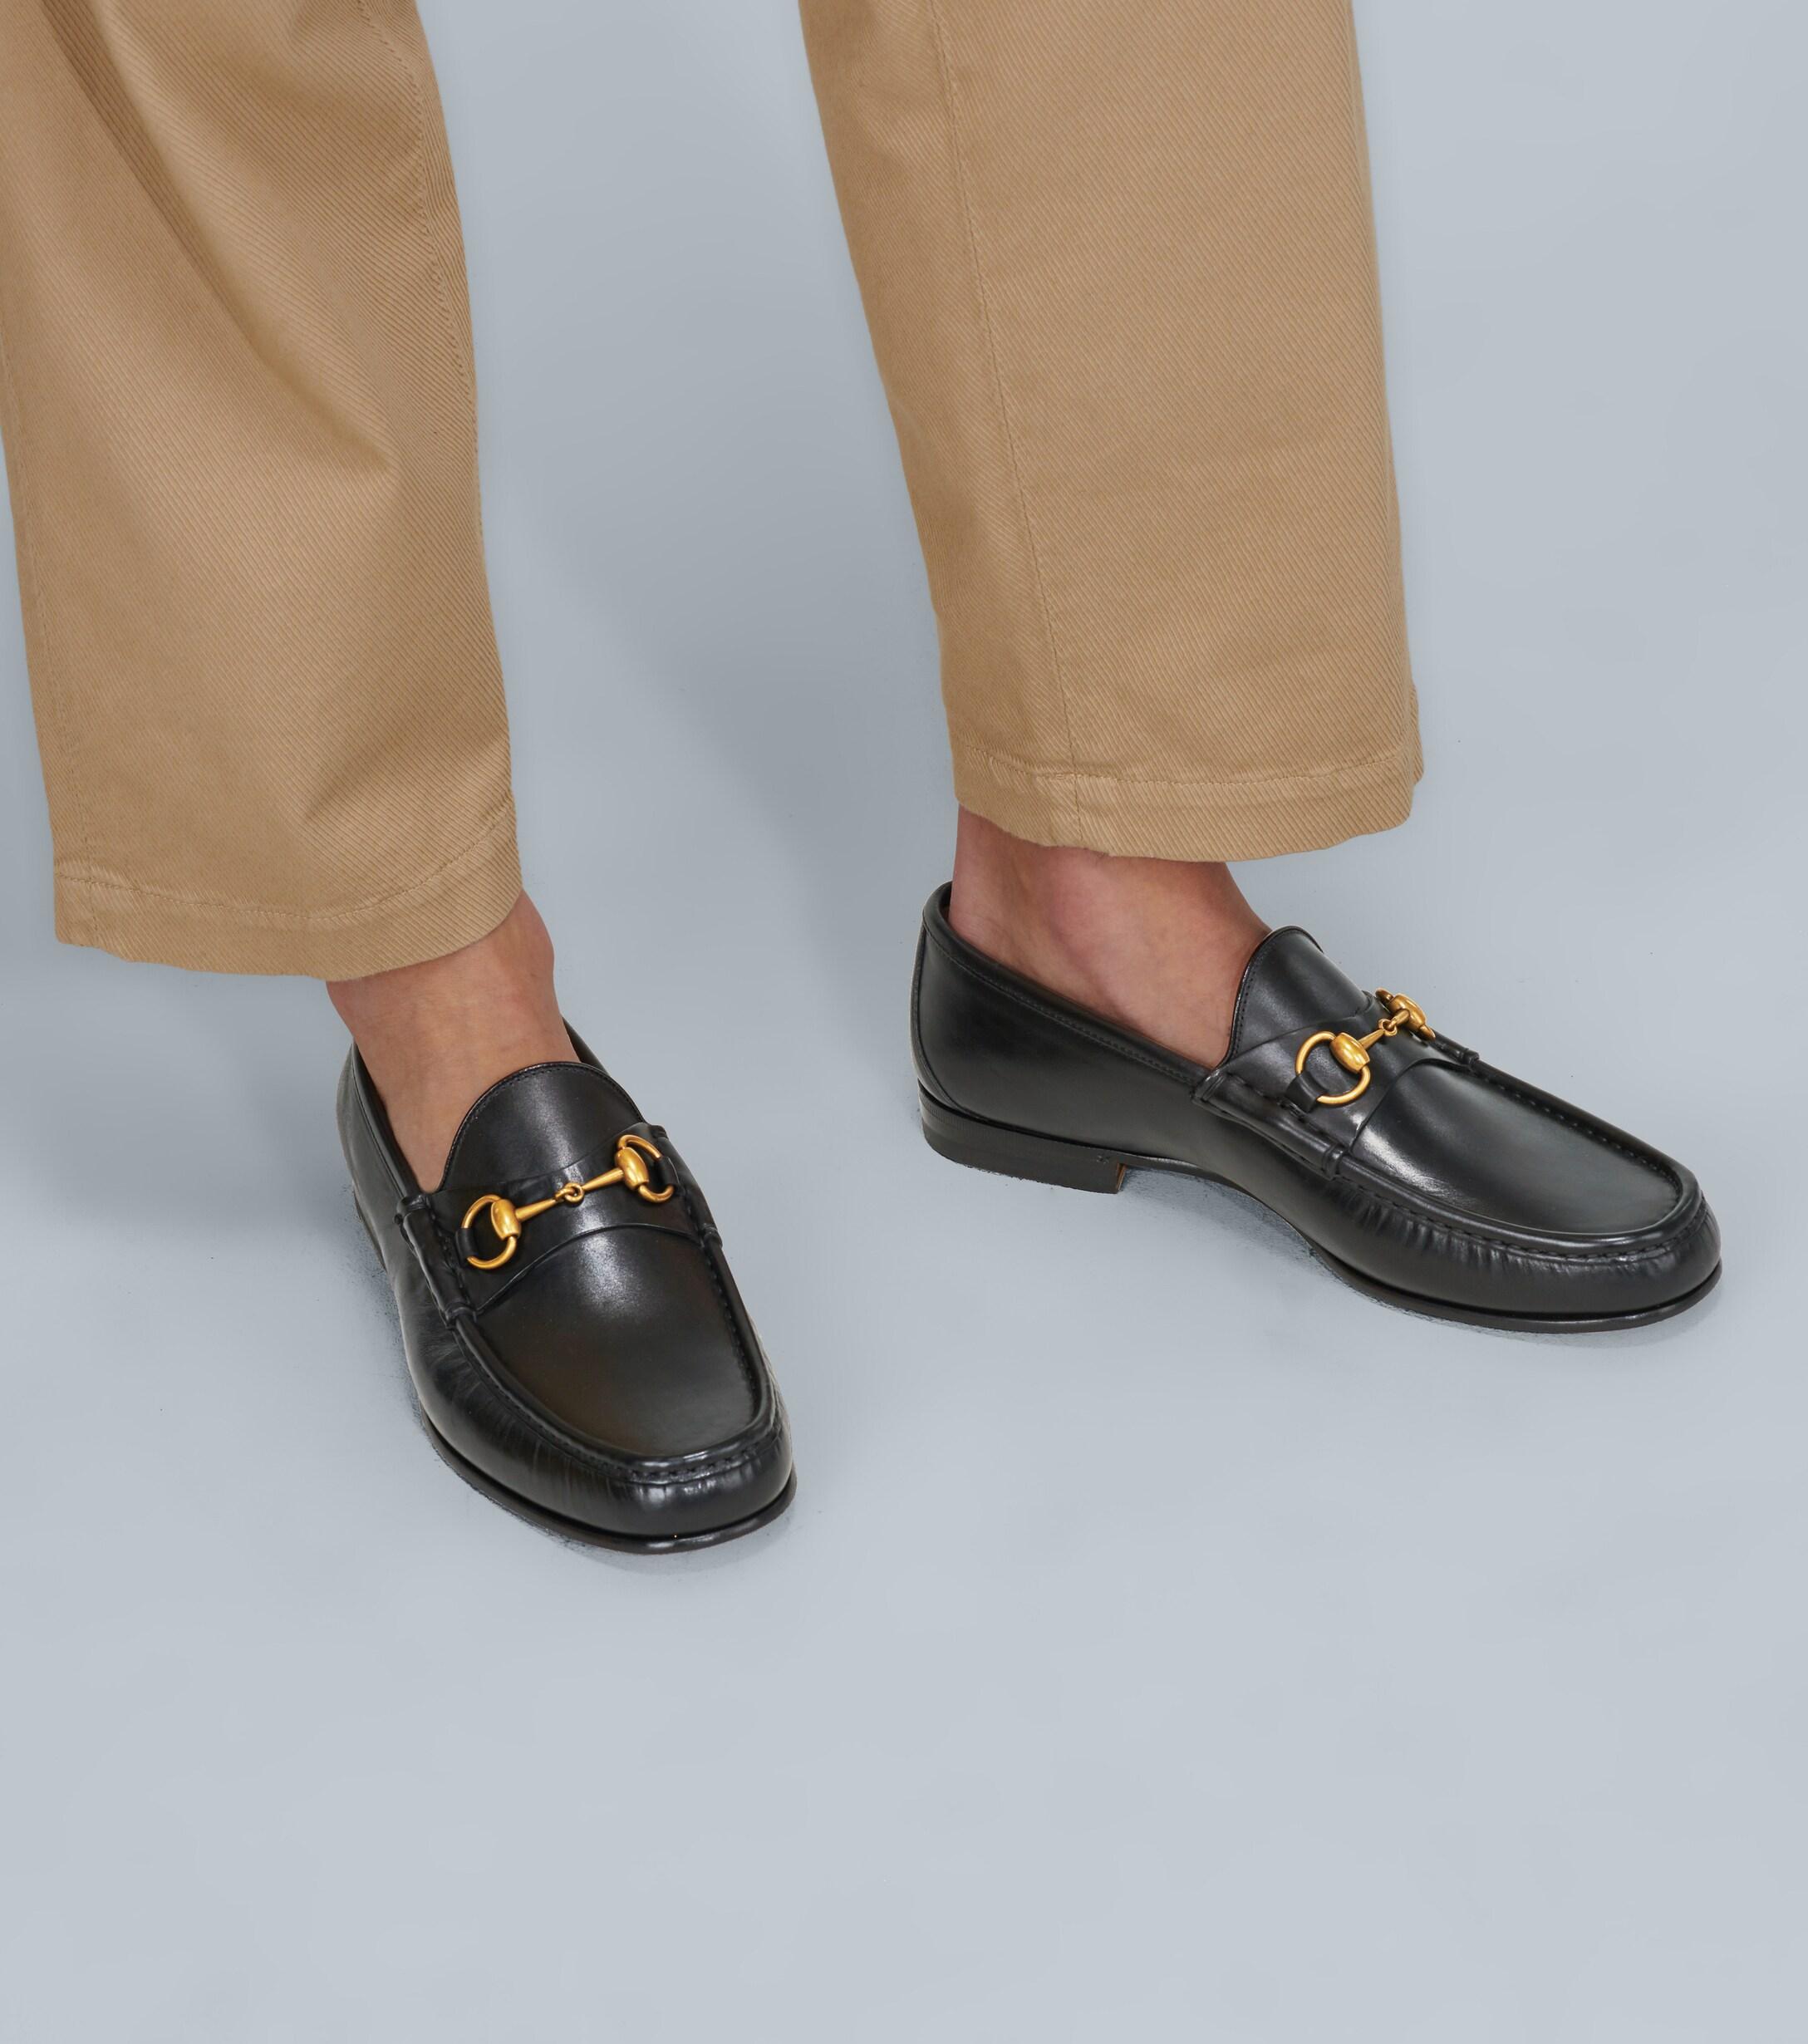 Gucci 1953 Horsebit Leather Loafer in Black for Men - Save 35% - Lyst